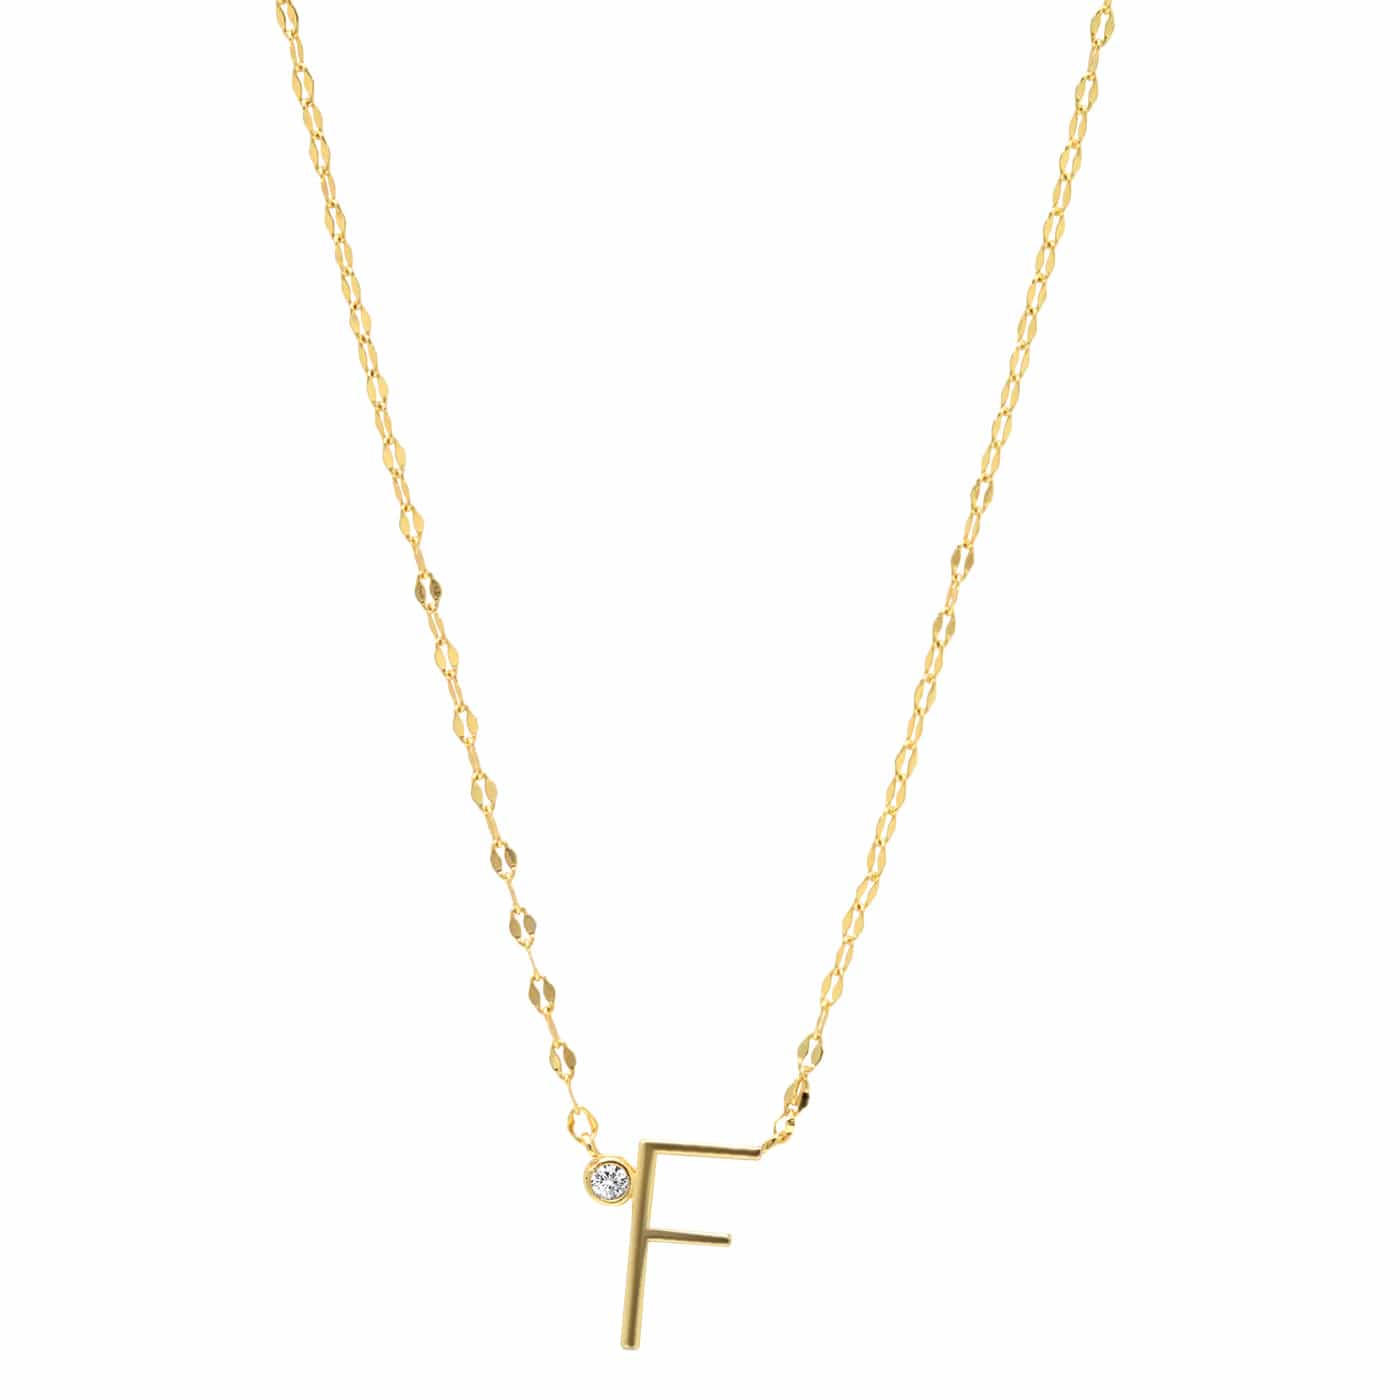 TAI JEWELRY Necklace F Medium Sized Initial Necklace With Cz Accent